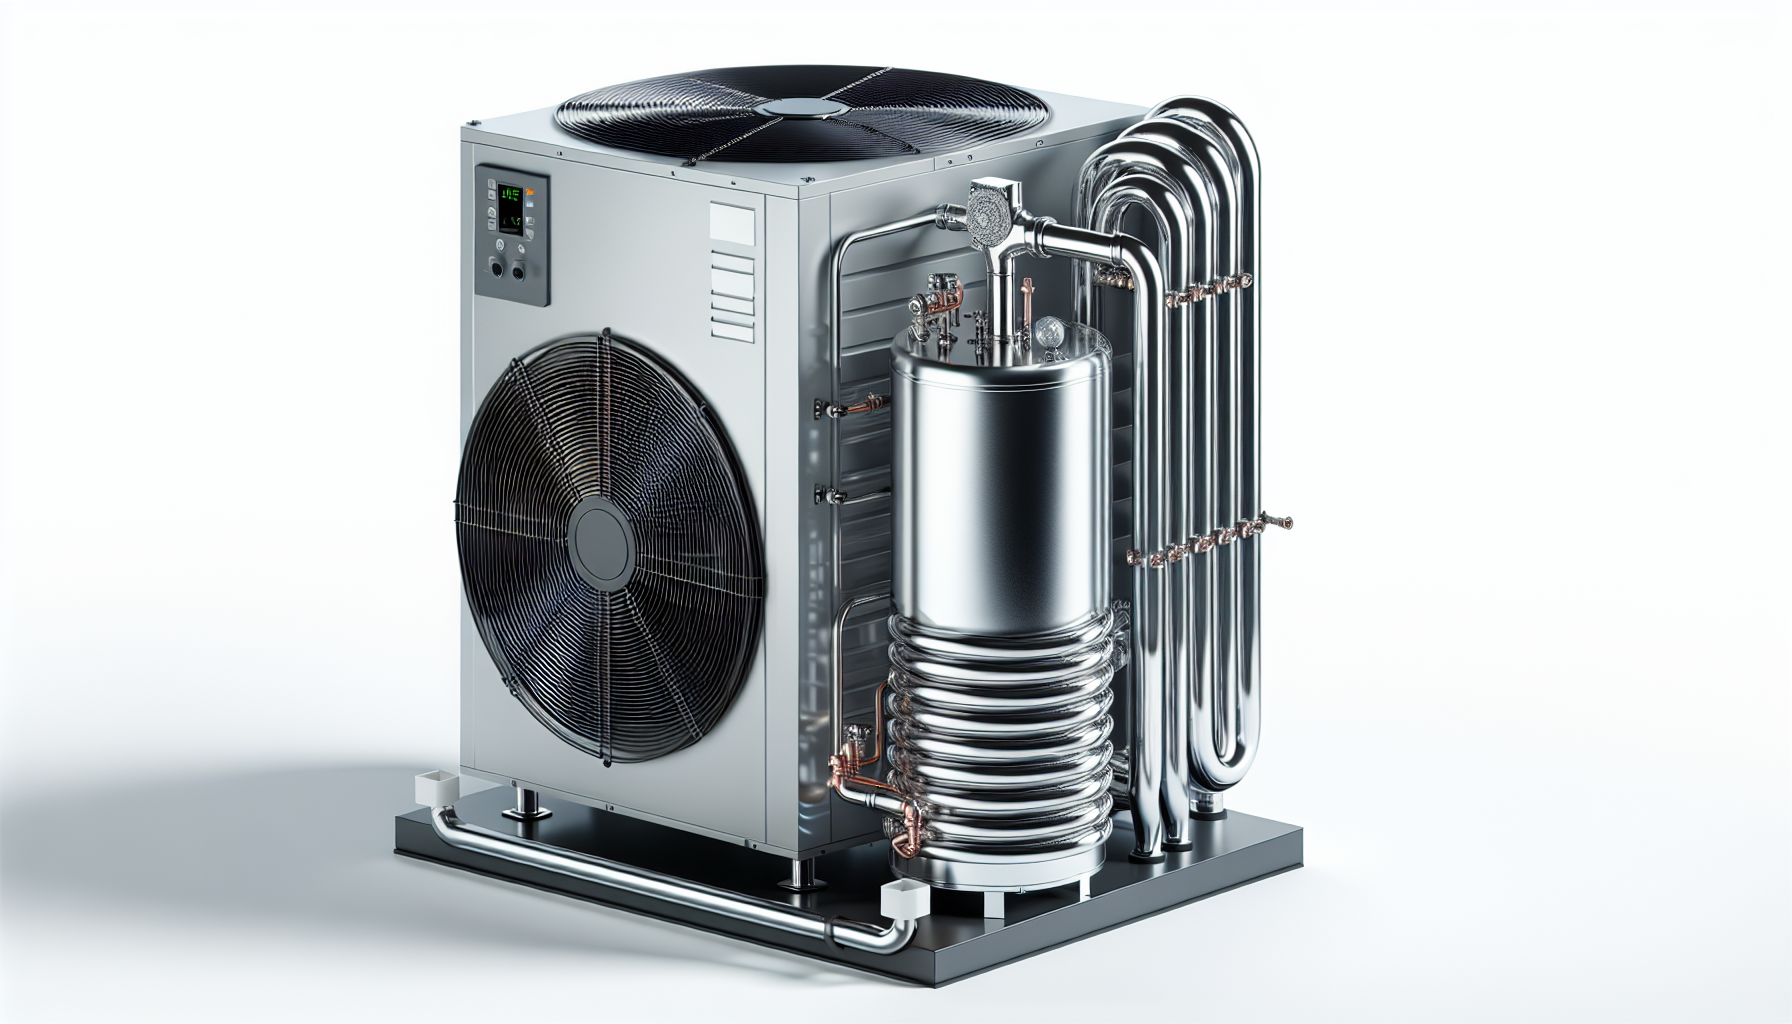 Heat pump hot water system components